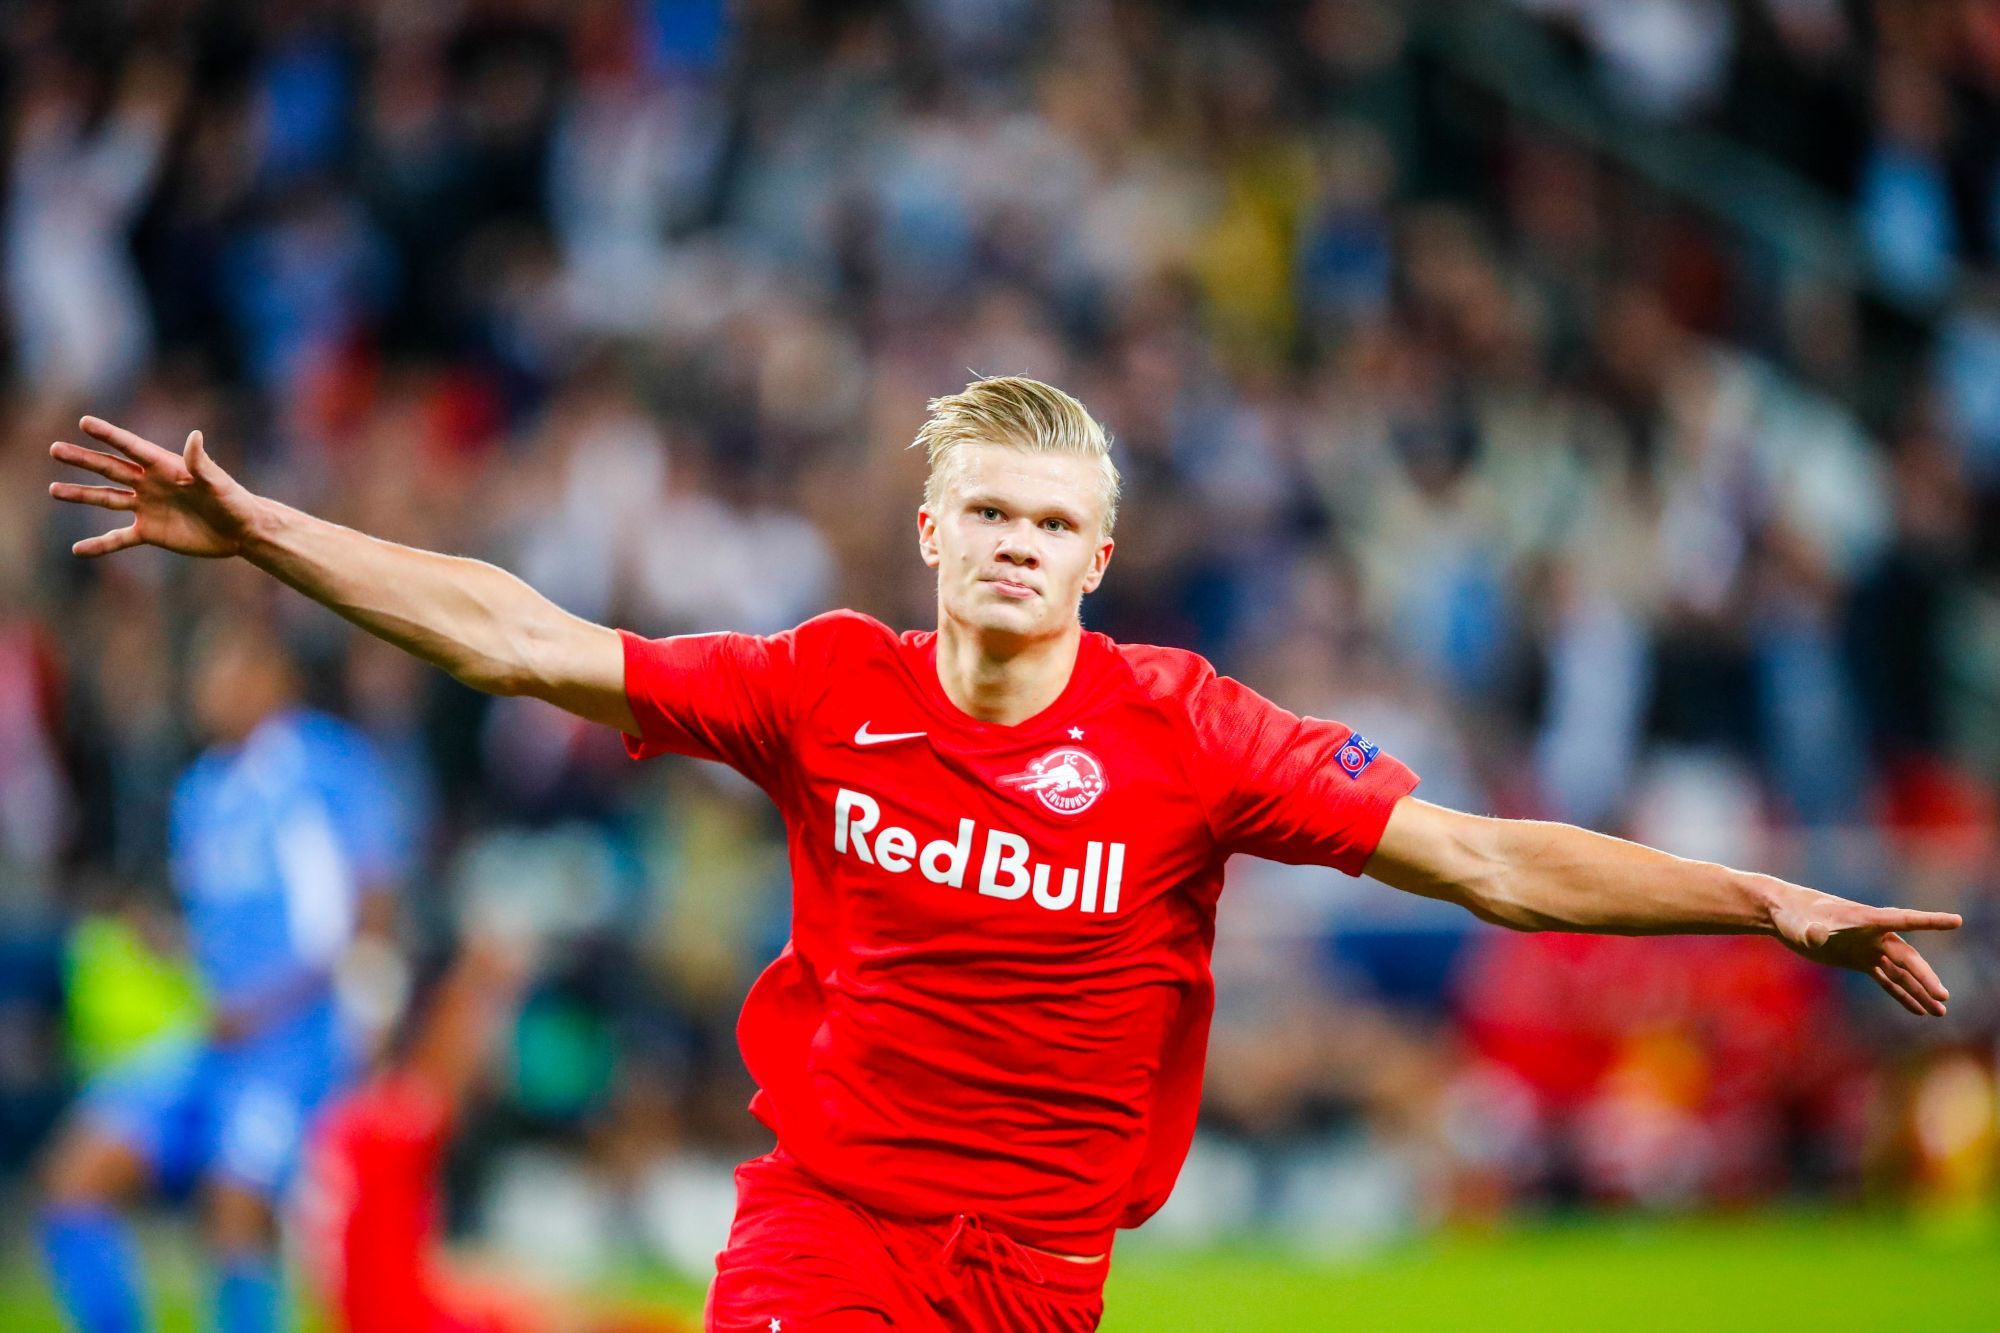 SALZBURG,AUSTRIA,17.SEP.19 - SOCCER - UEFA Champions League, group stage, Red Bull Salzburg vs KRC Genk. Image shows the rejoicing of Erling Haaland (RBS). Photo: GEPA pictures/ Jasmin Walter 

Photo by Icon Sport - Erling HAALAND - Red Bull Arena - Salzbourg (Autriche)